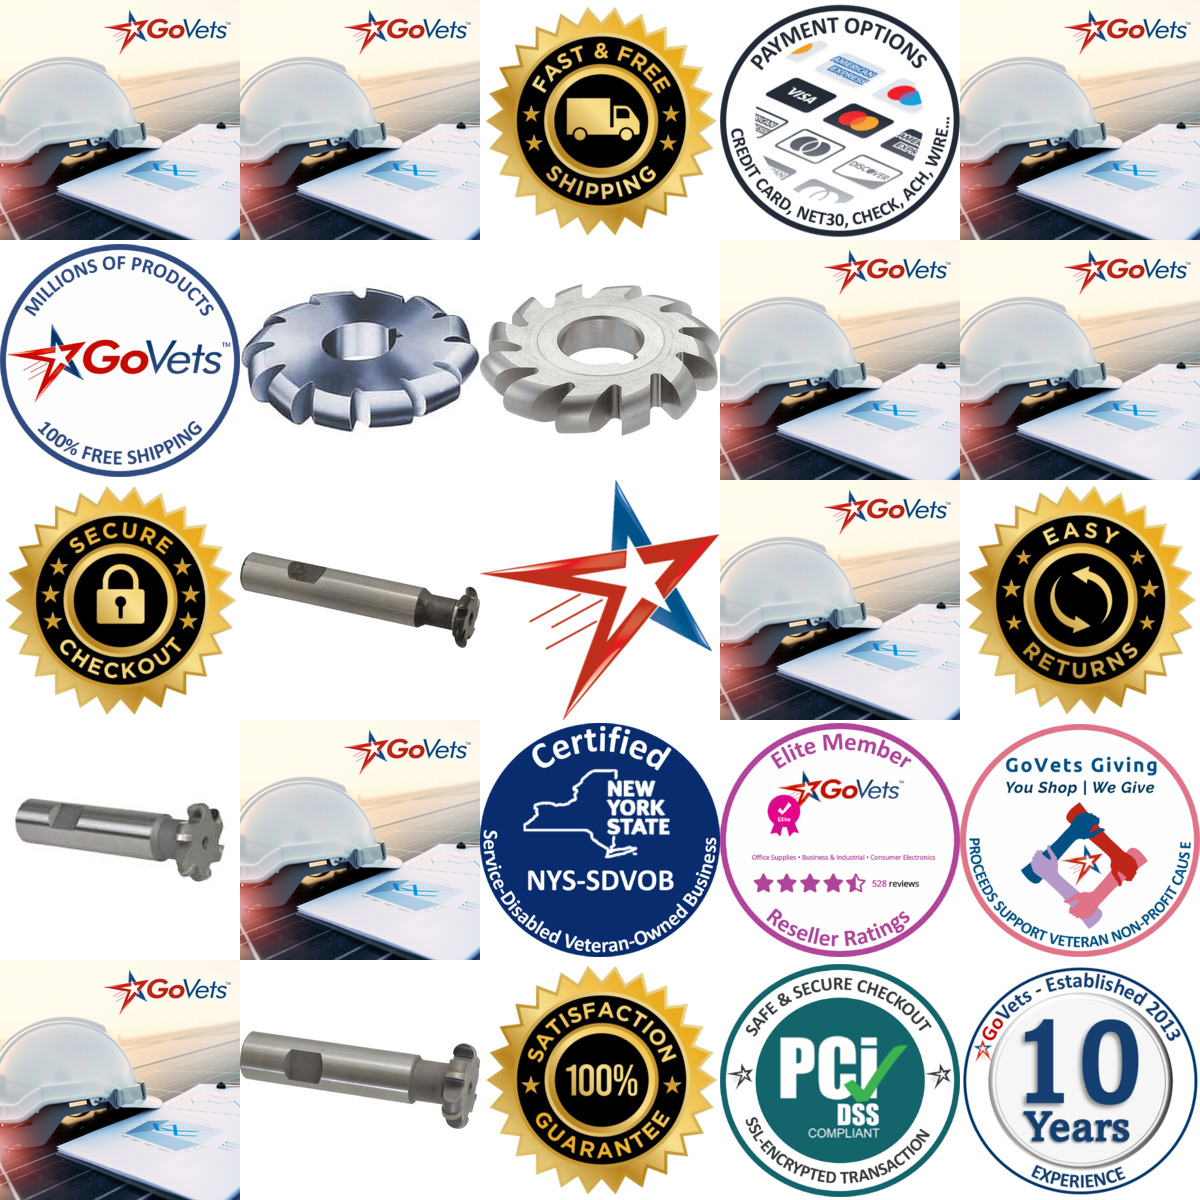 A selection of Convex Radius Cutters products on GoVets